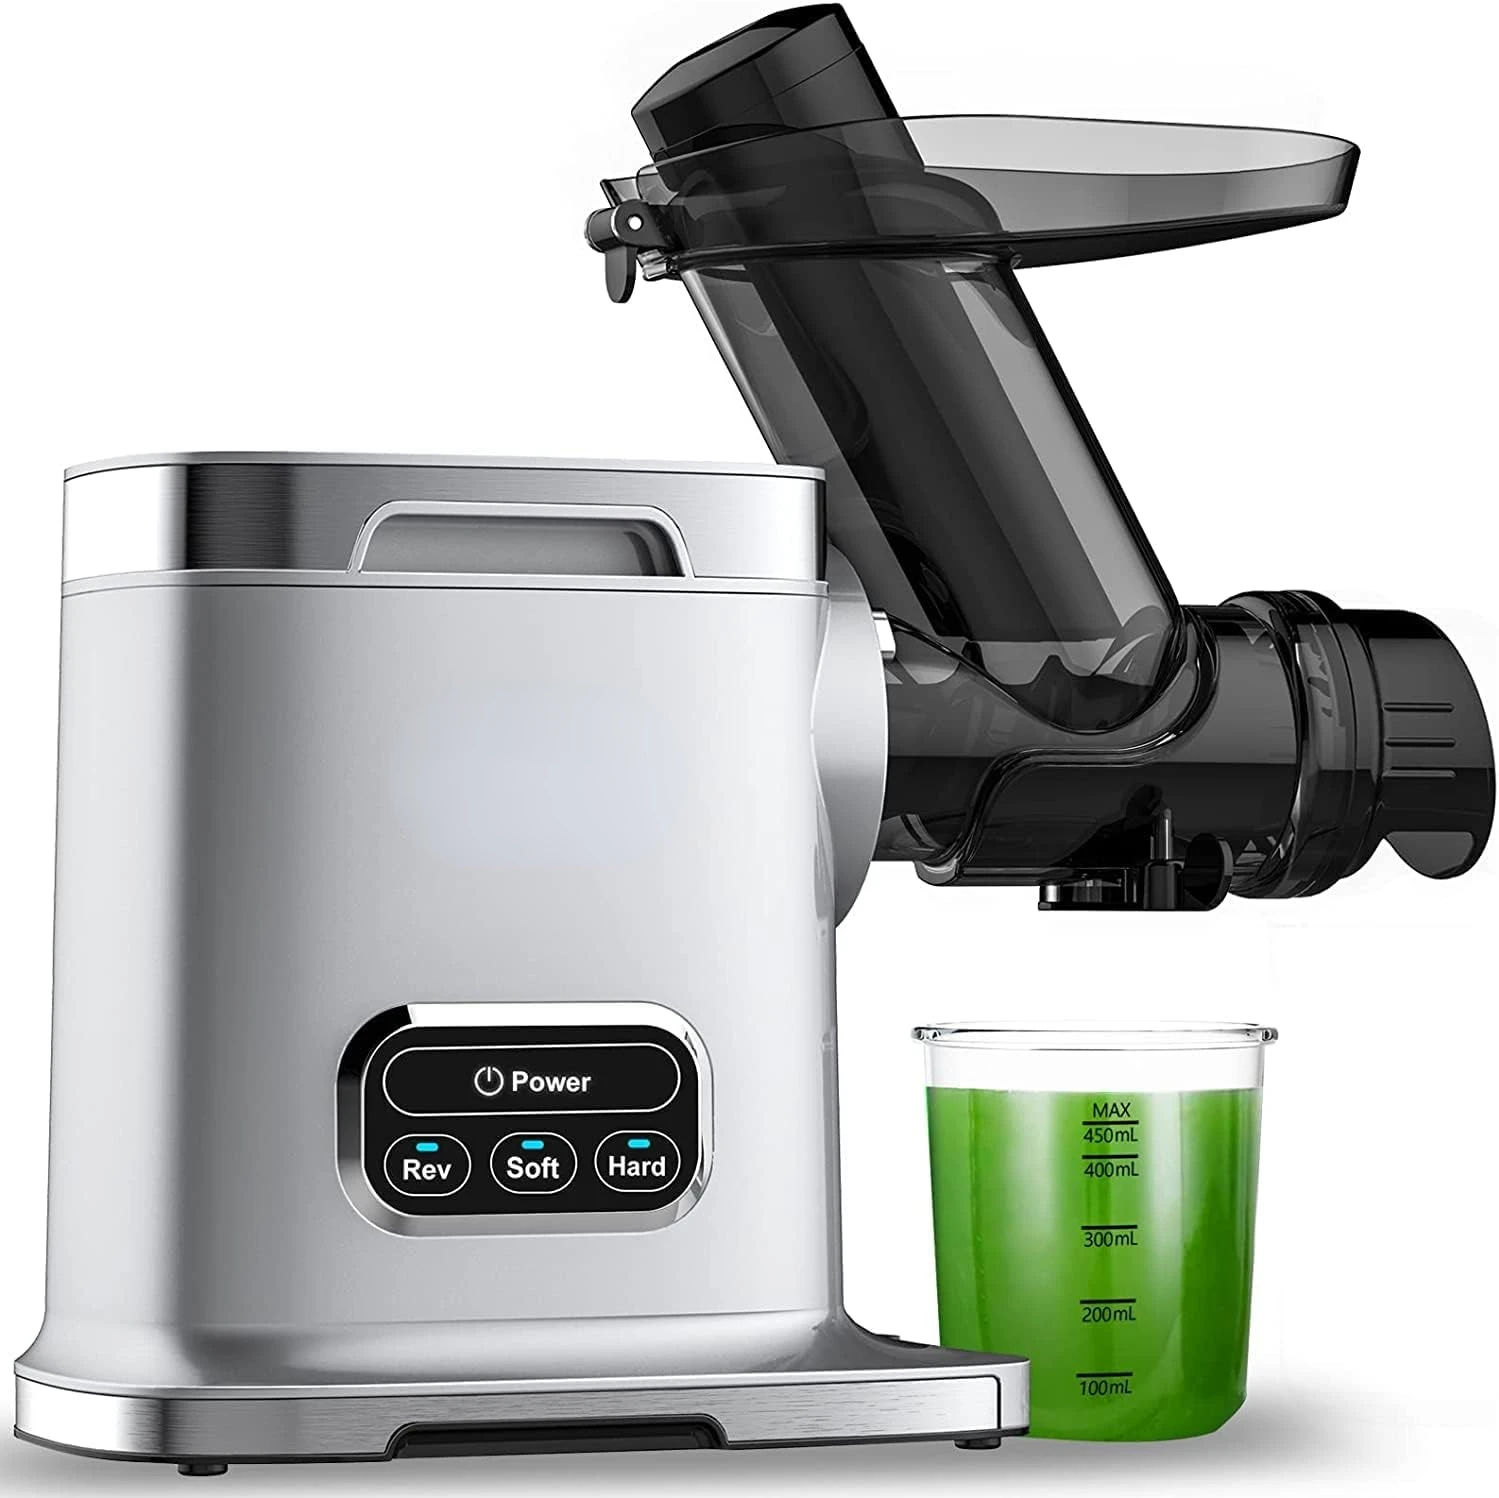 

Press Juicer, Slow Juicer, Juicer Machines with 3 Inch Wide Chute, 2-Speed Modes & Reverse Function, Masticating Juicer with Eye